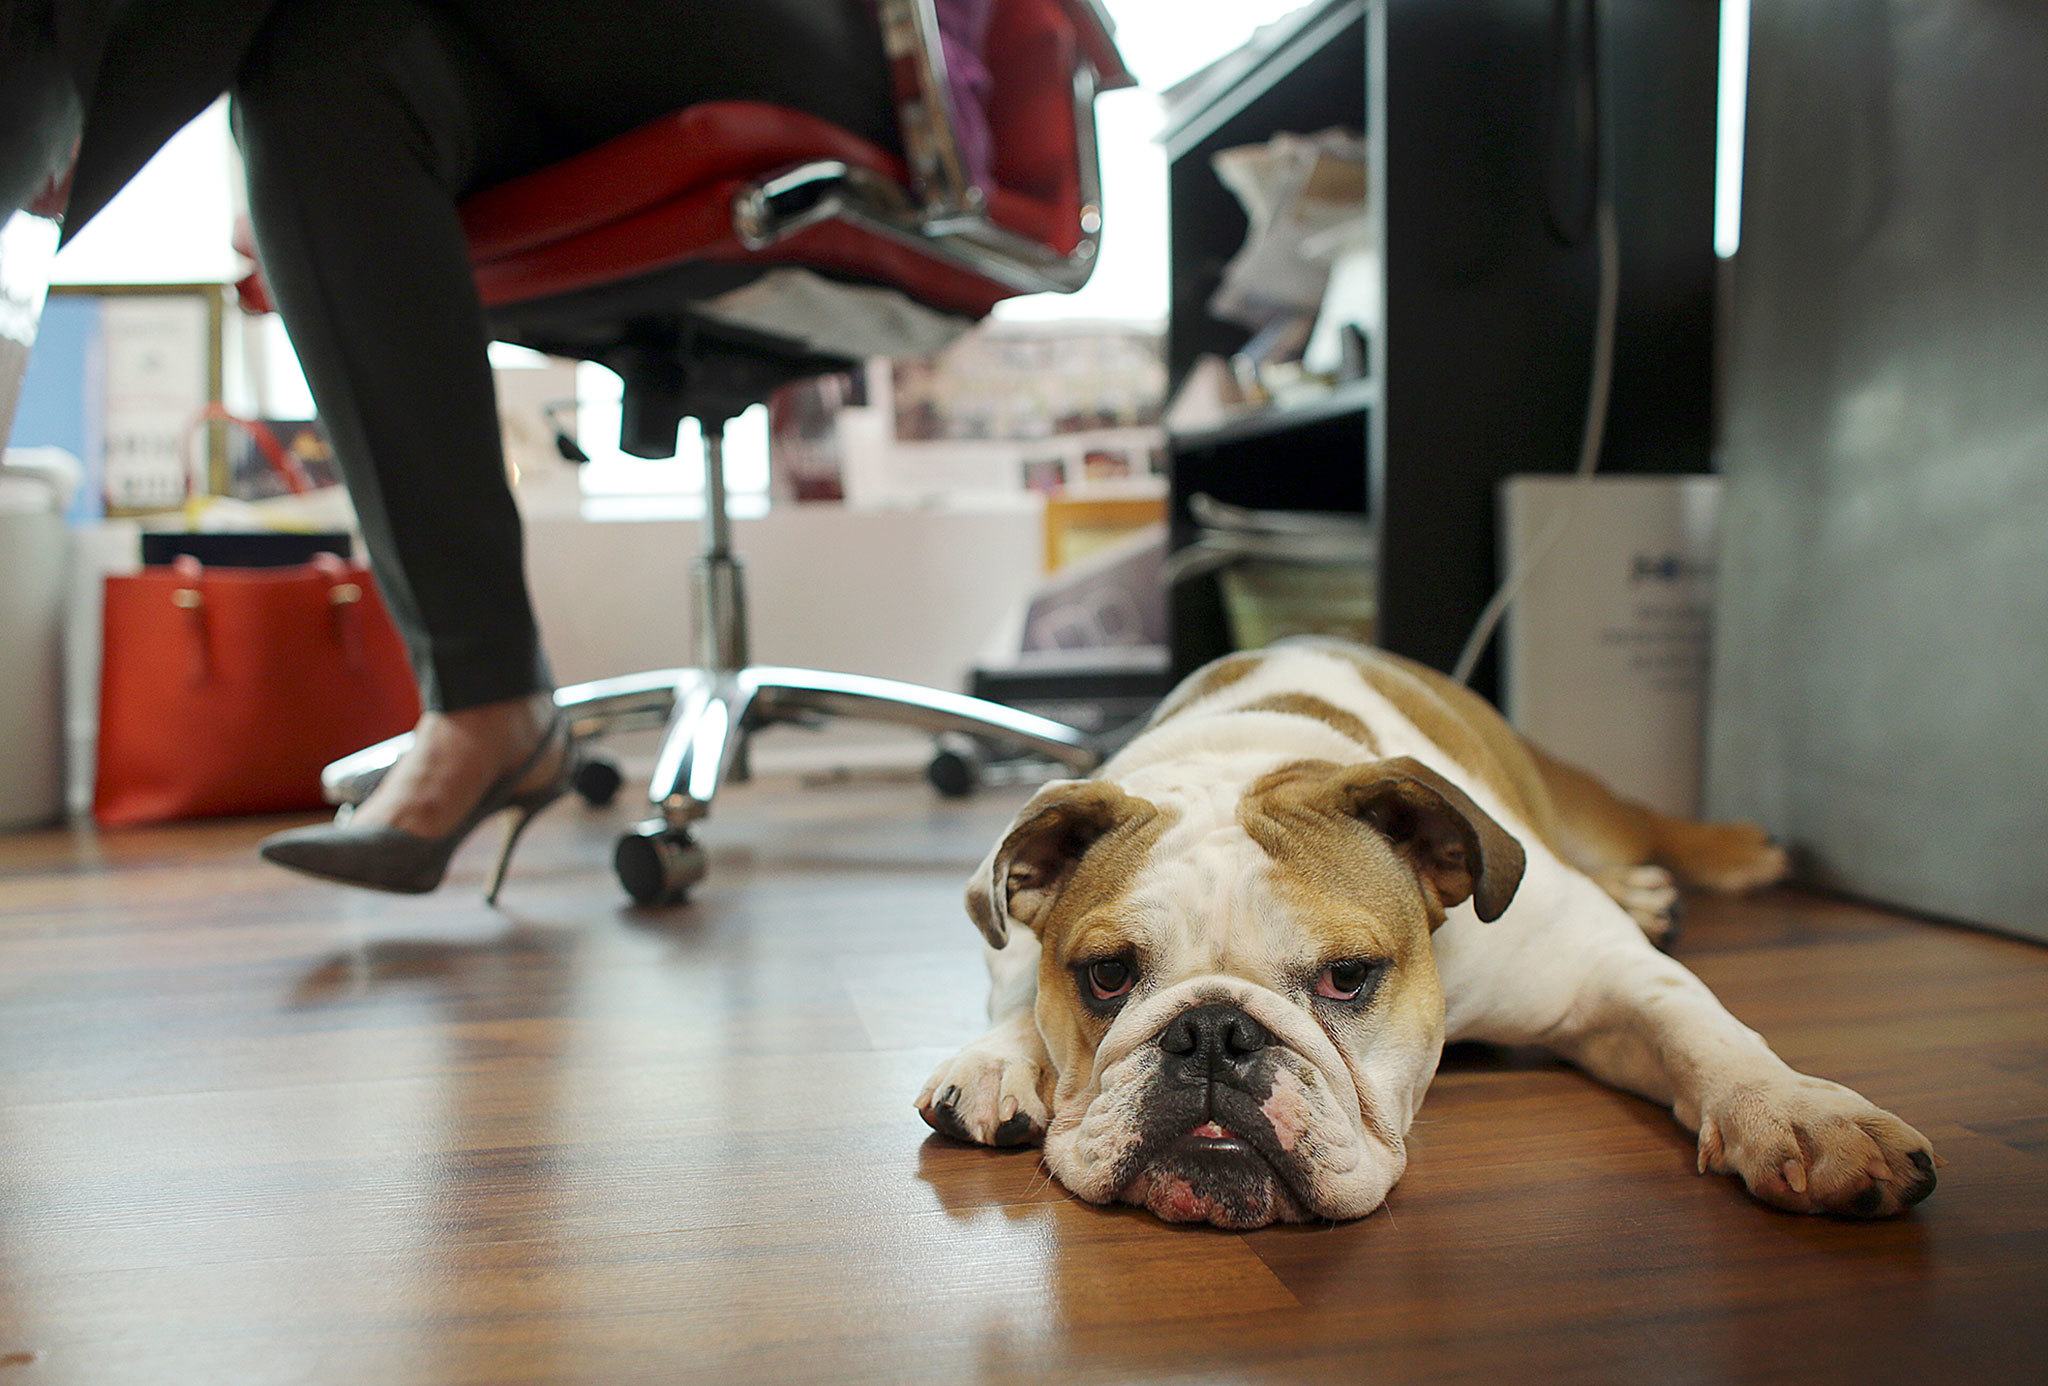 Bulldog Rosie sits under the desk of her owner Tuesday at O’Connell & Goldberg Public Relations in Hollywood, Florida. (AP Photo/Lynne Sladky)